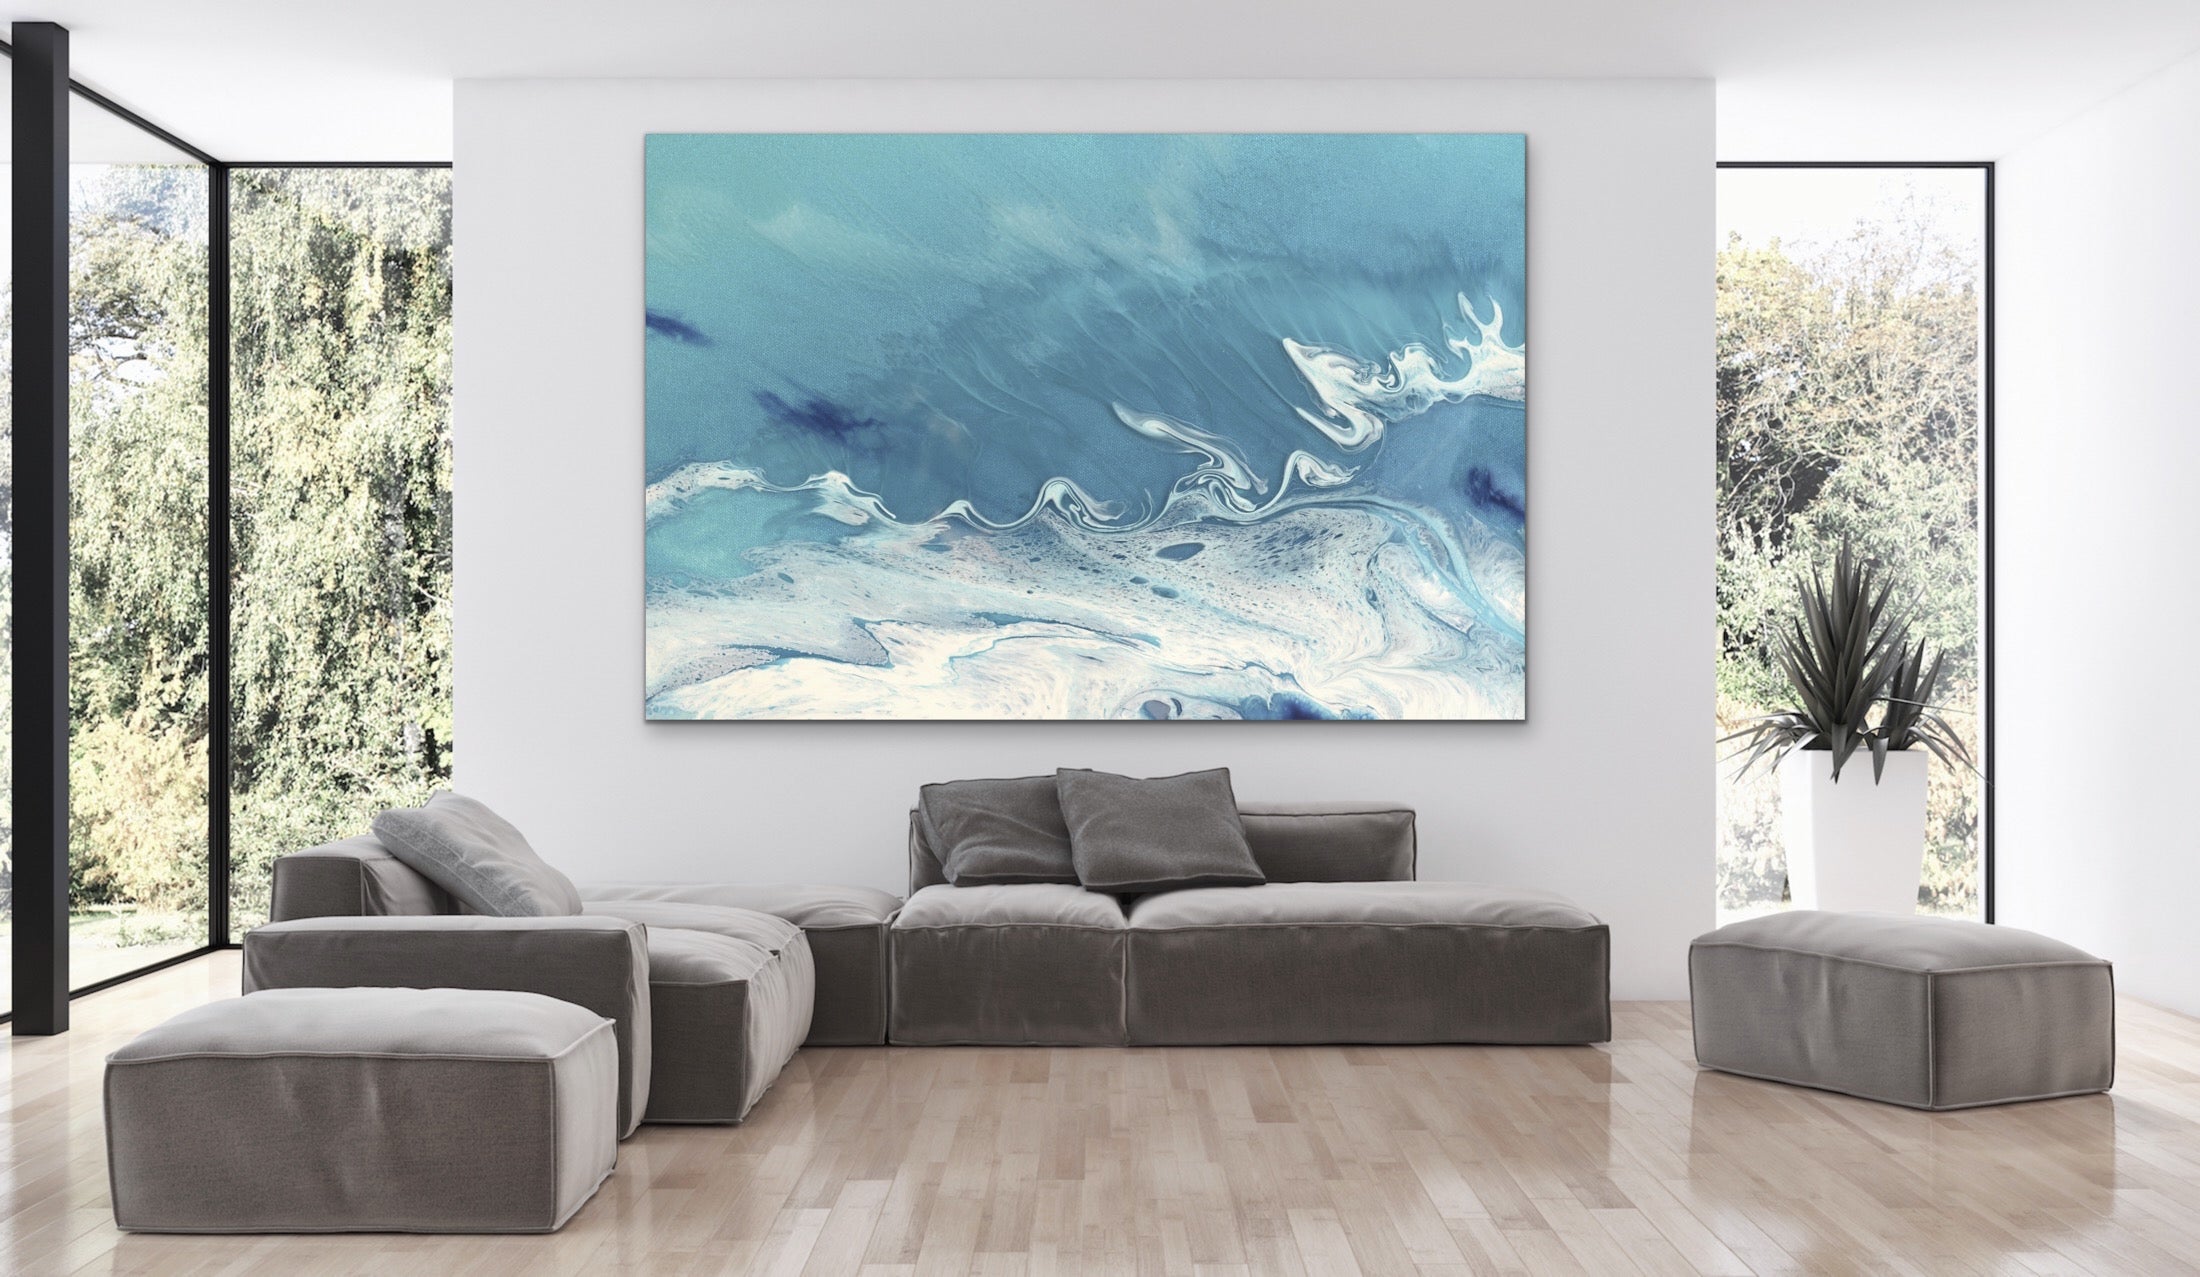 Pastel Abstract Artwork. Bali Utopia Grey Sky. Art Print. Antuanelle 6 Neutral Limited Edition Print